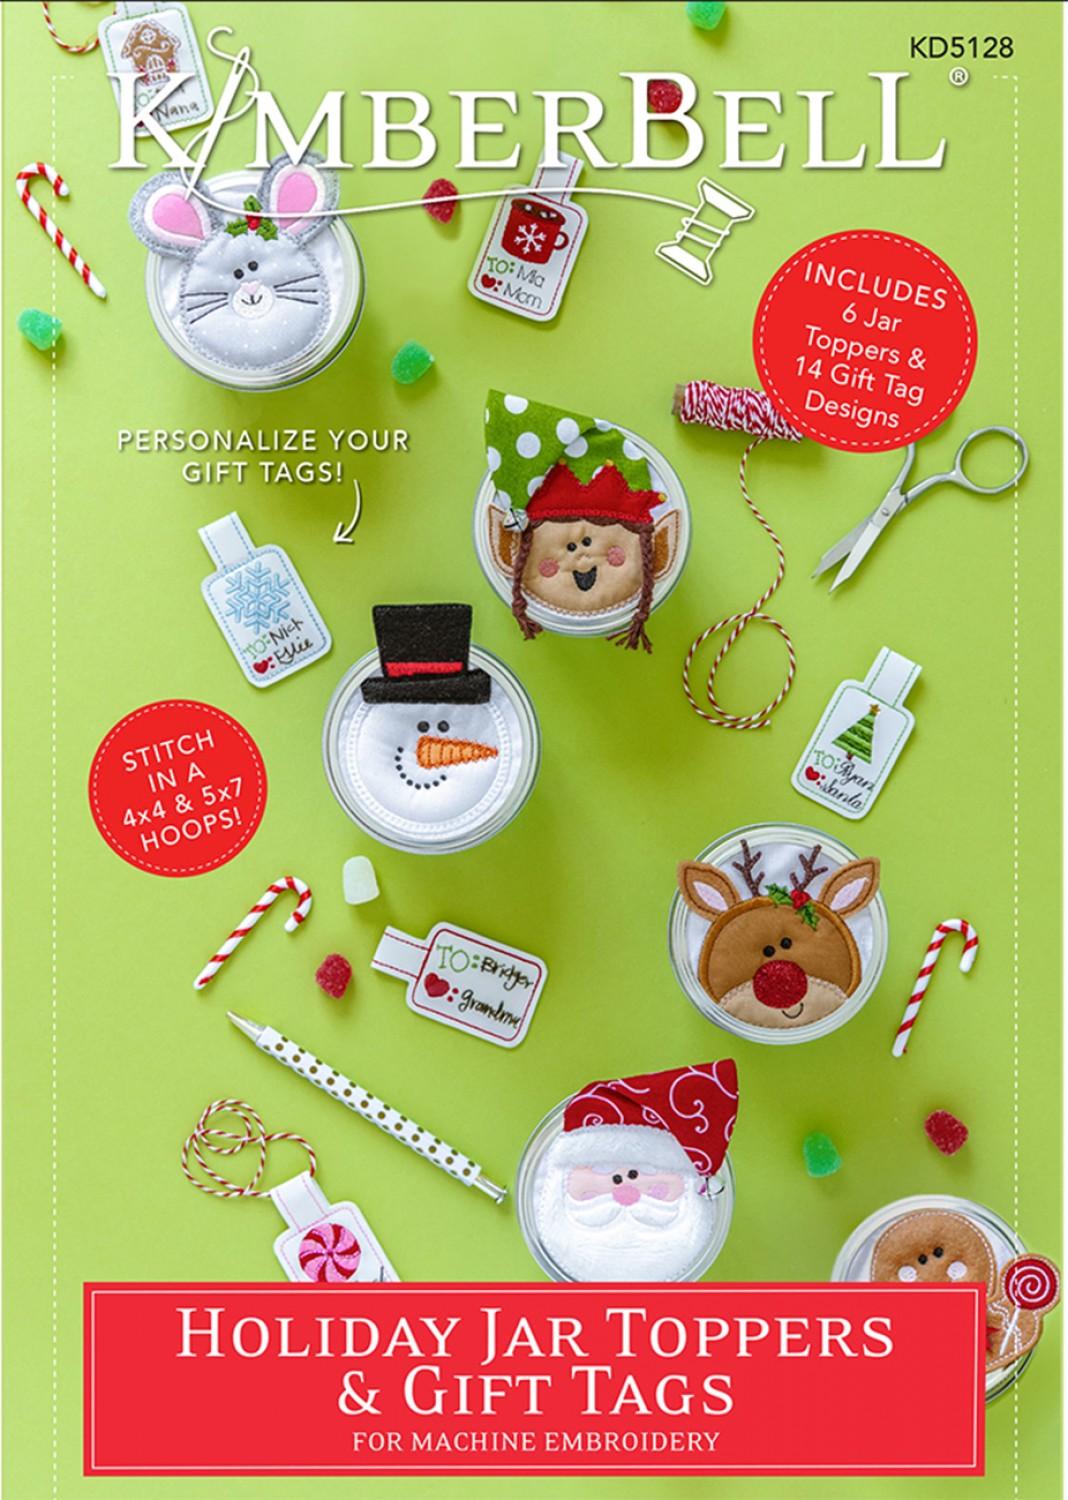 Holiday Jar Toppers & Gift Tags # KD5128